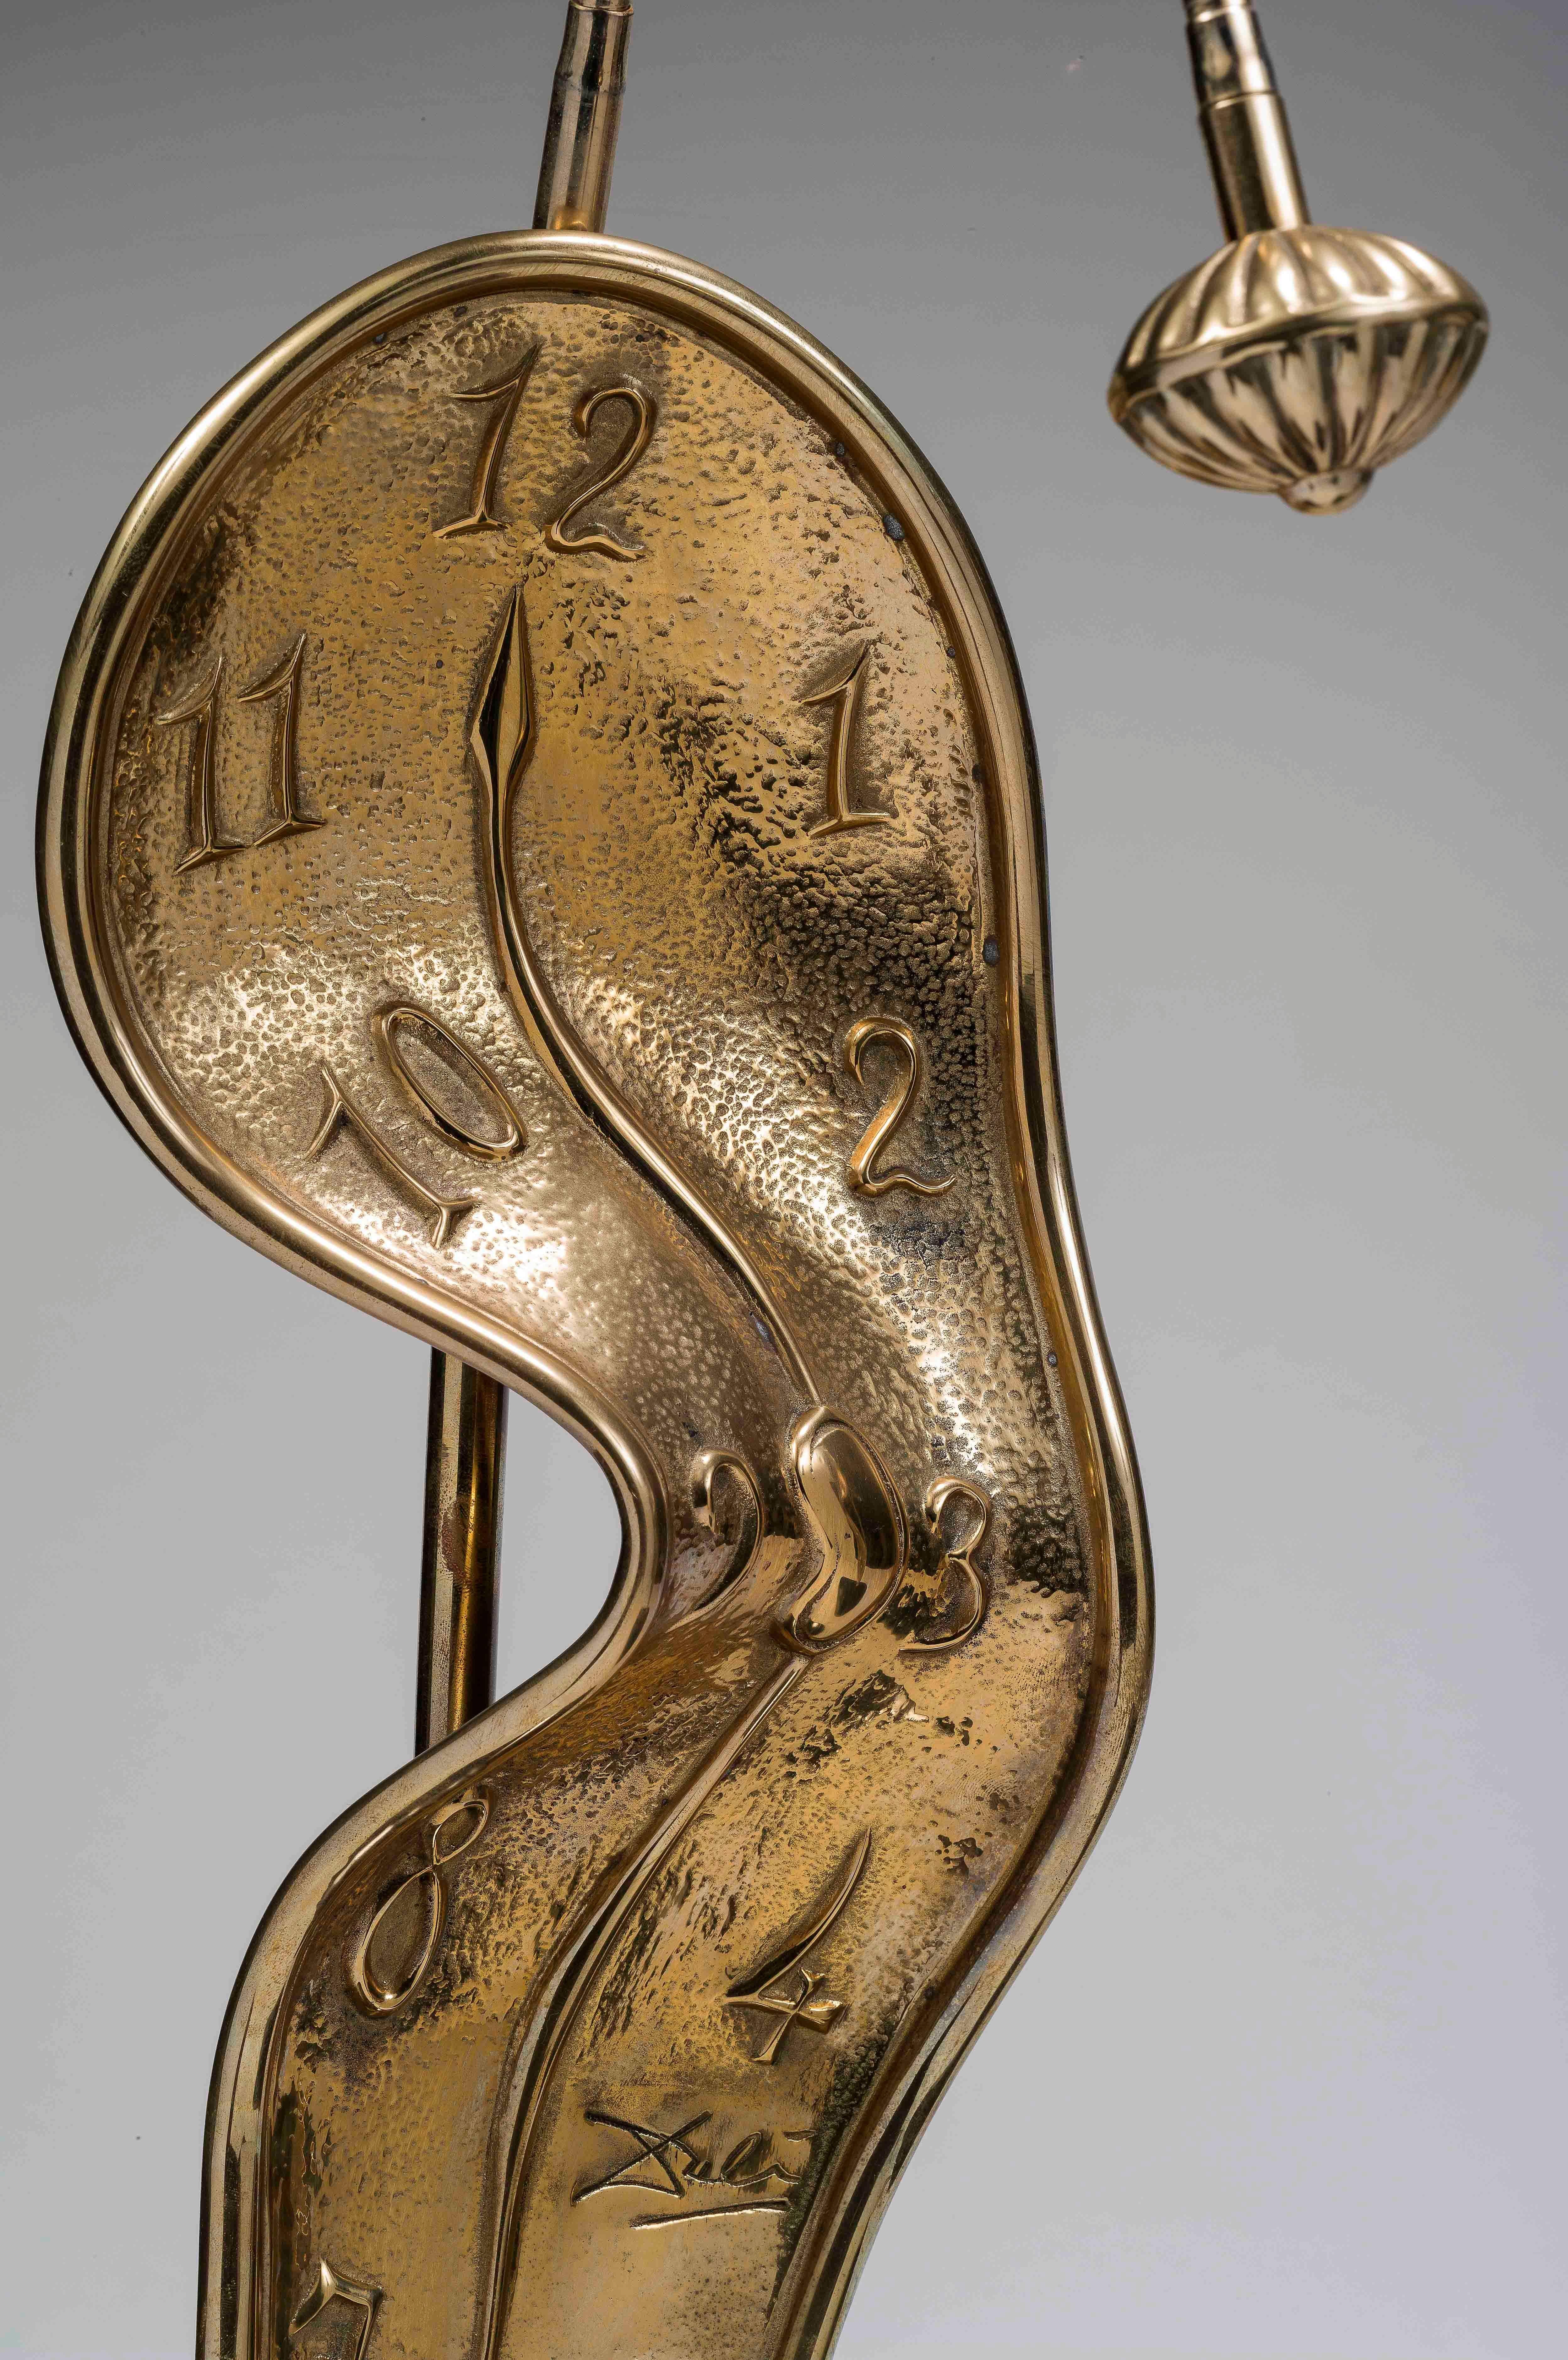 2 Montres Molles (Two The Soft Watches) - Sculpture by Salvador Dalí